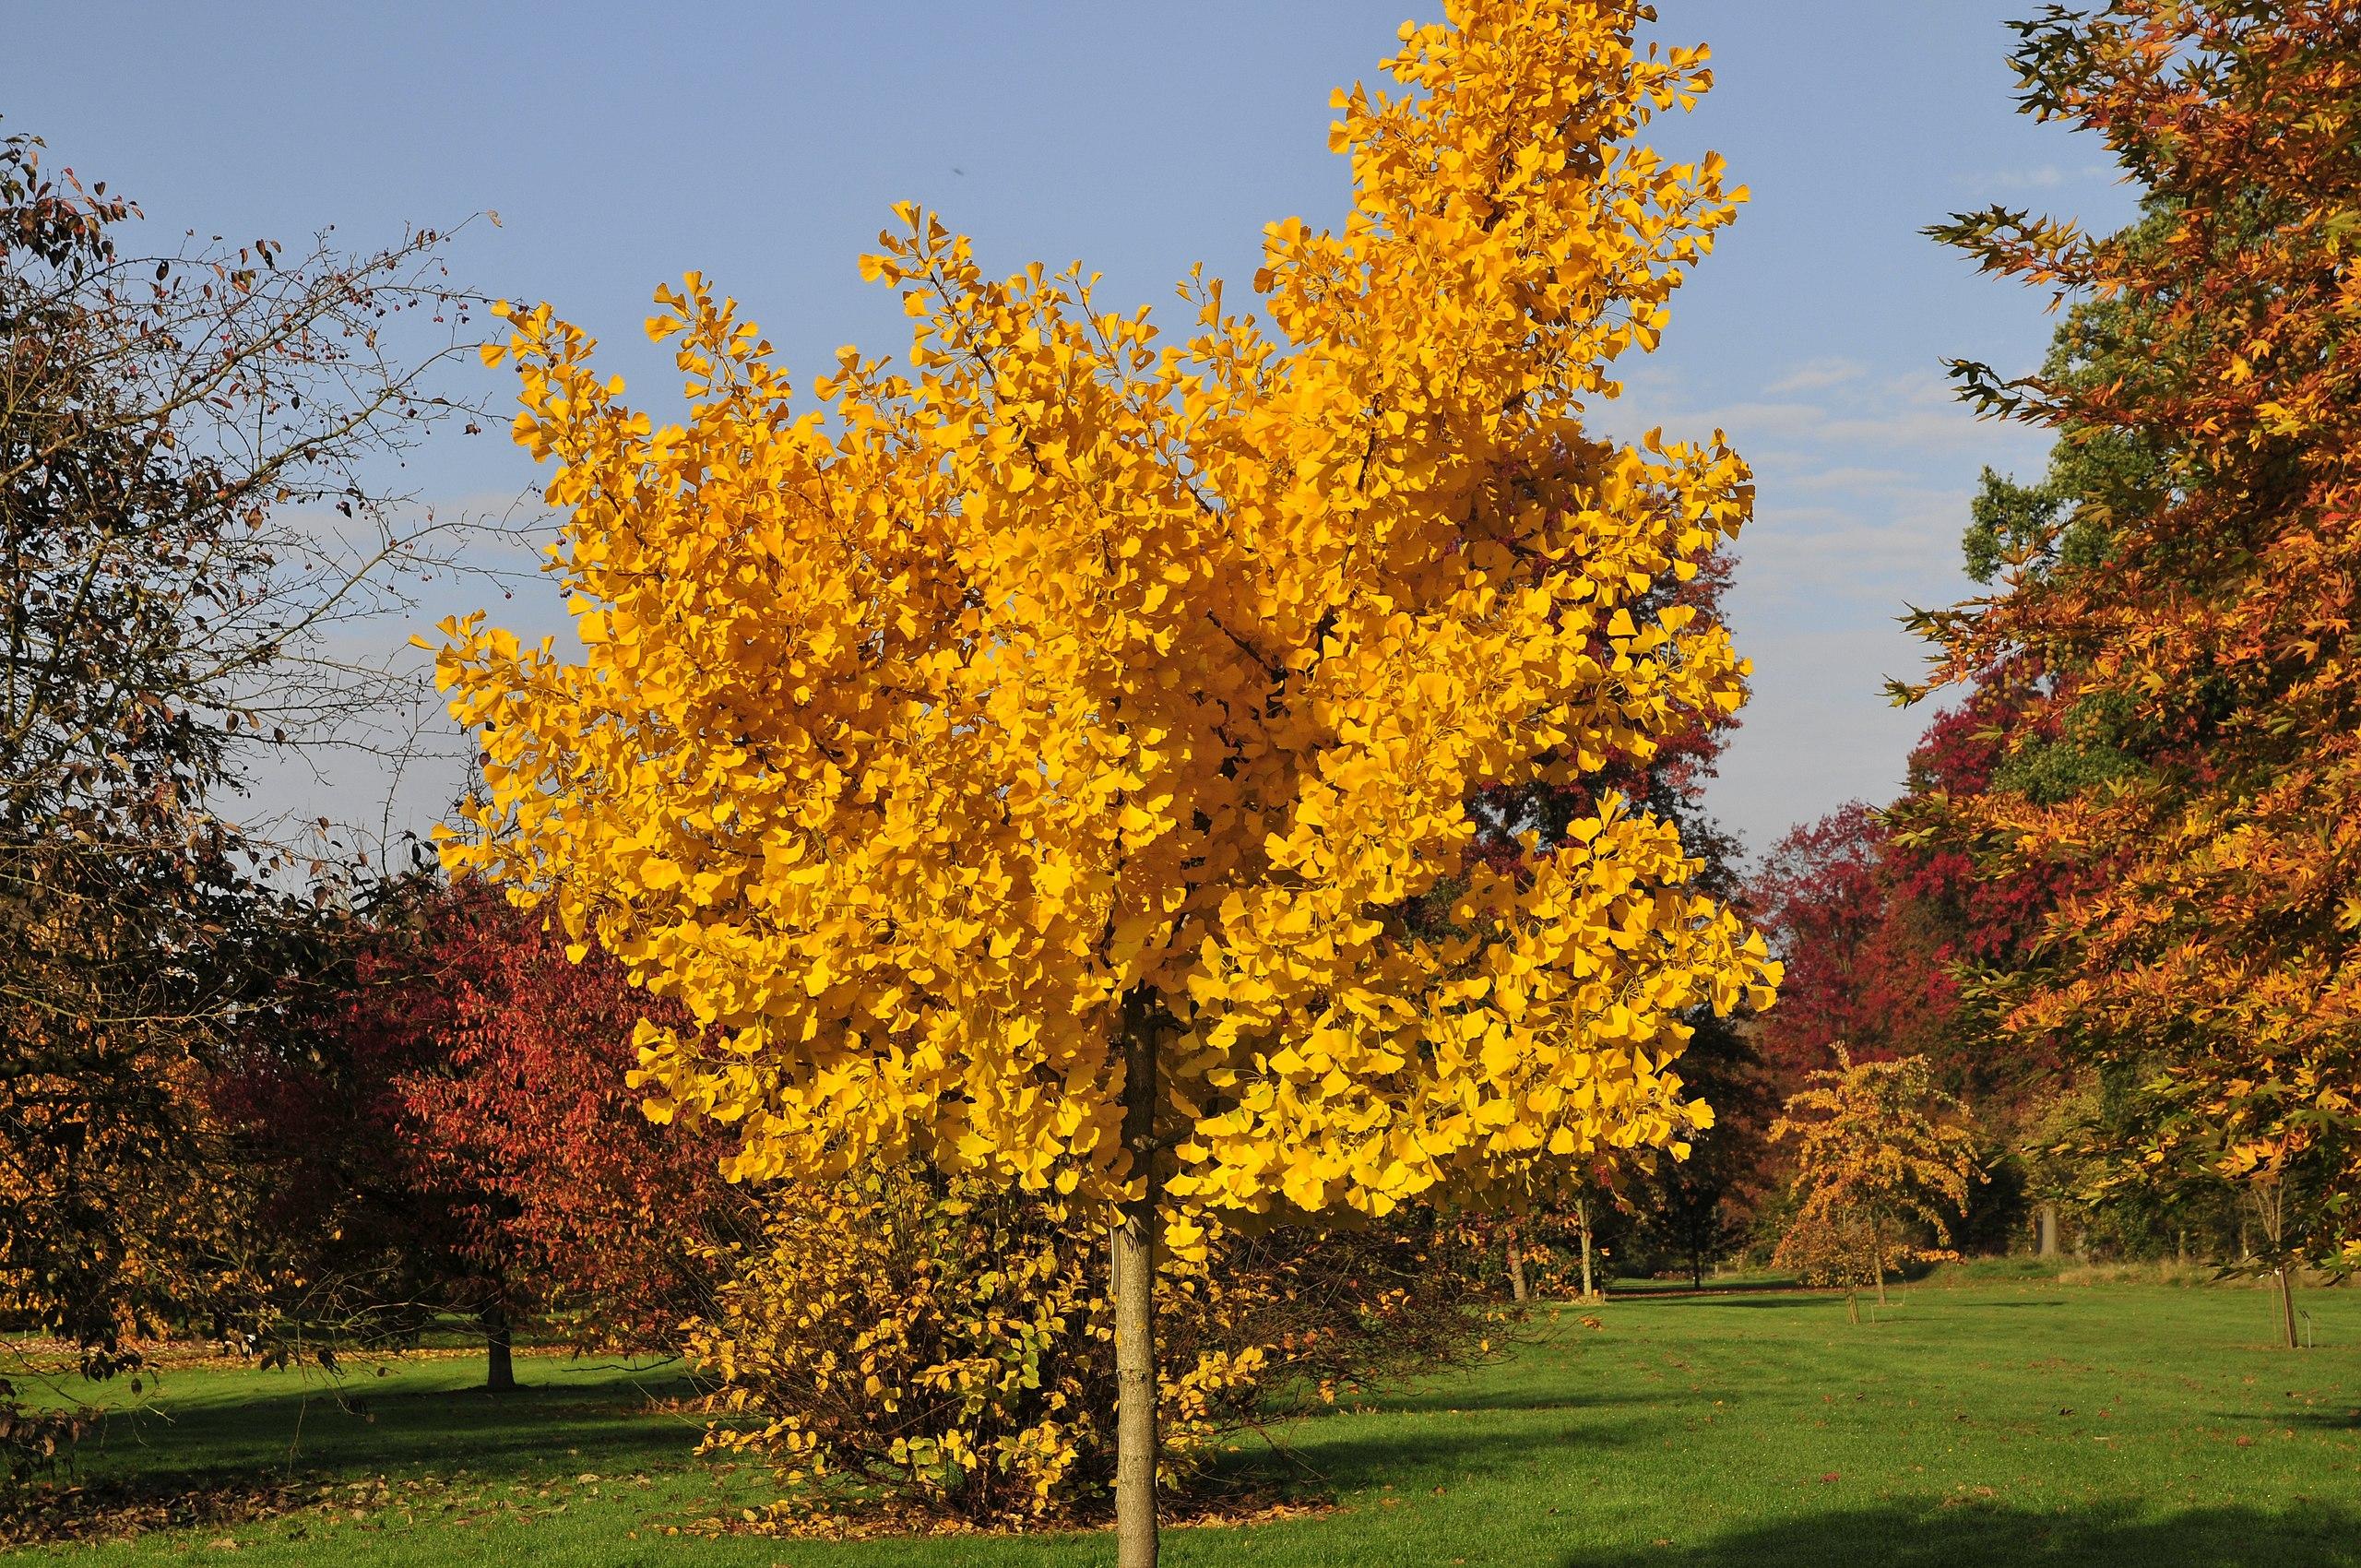 gold-yellow leaves with light-olive branches and trunk